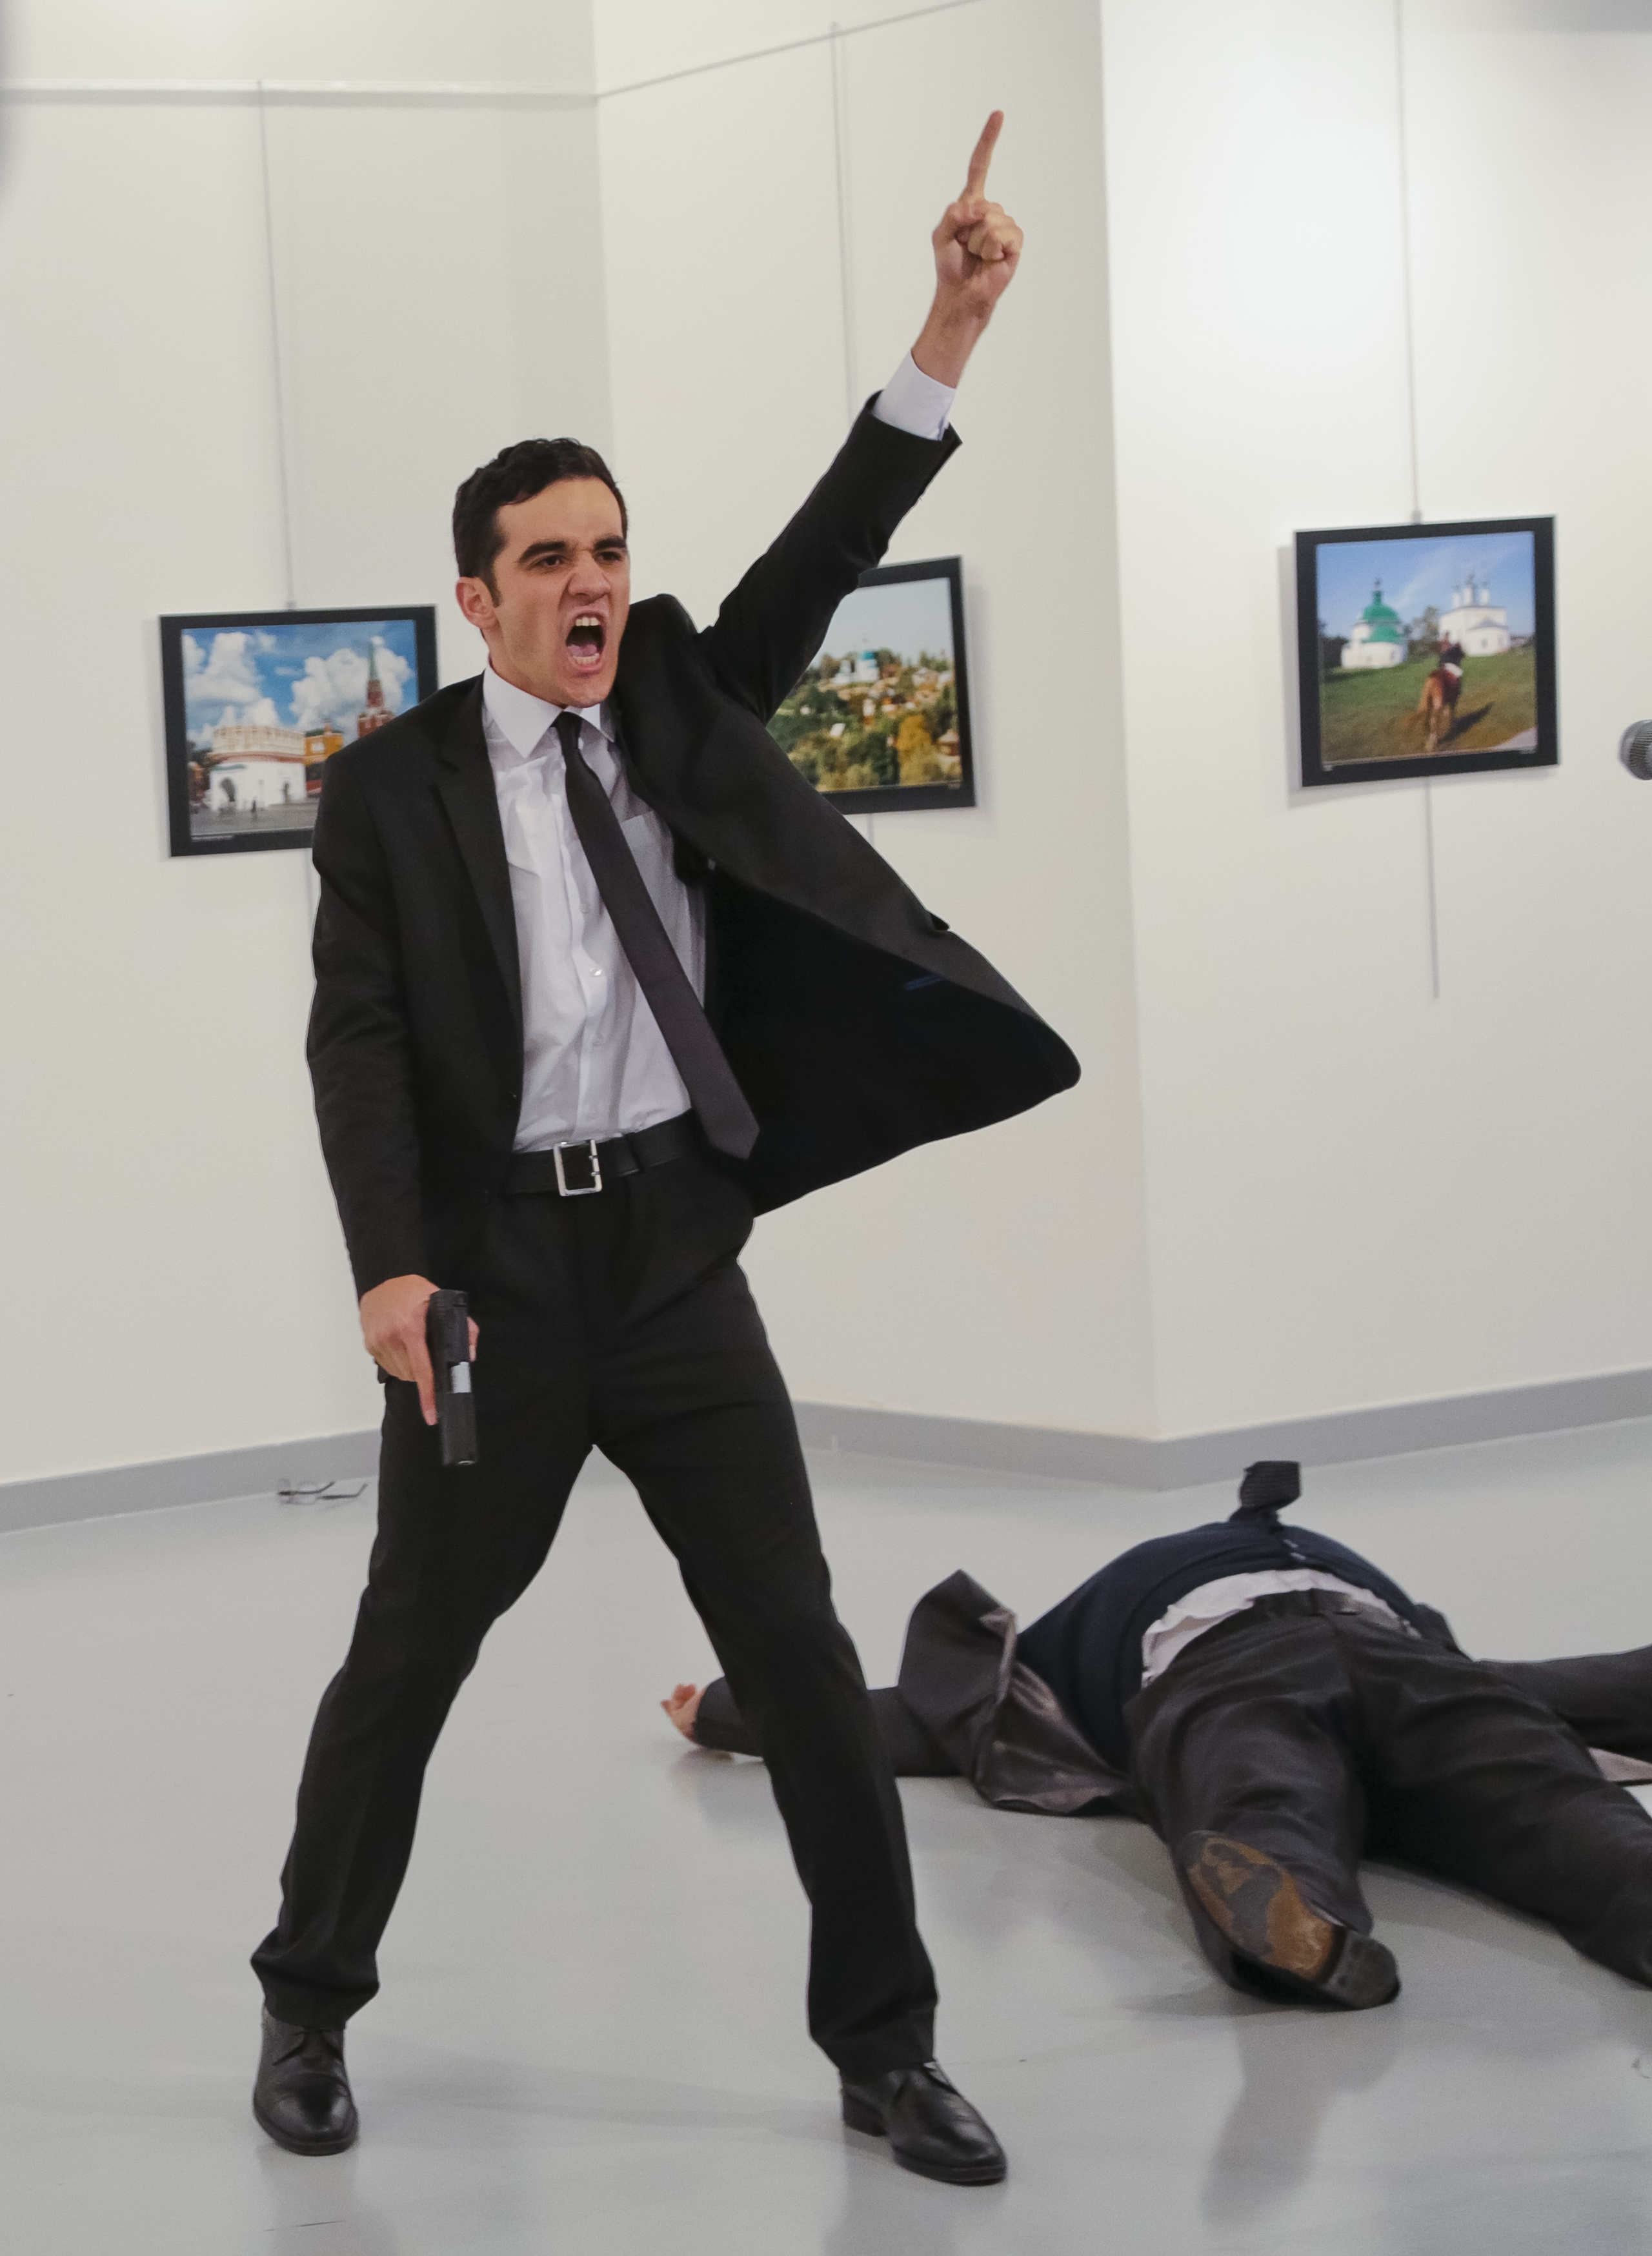 The gunman gestures after shooting the Russian Ambassador to Turkey, Andrey Karlov, at a photo exhibition in Ankara on Dec. 19, 2016. (Burhan Ozbilici—AP)